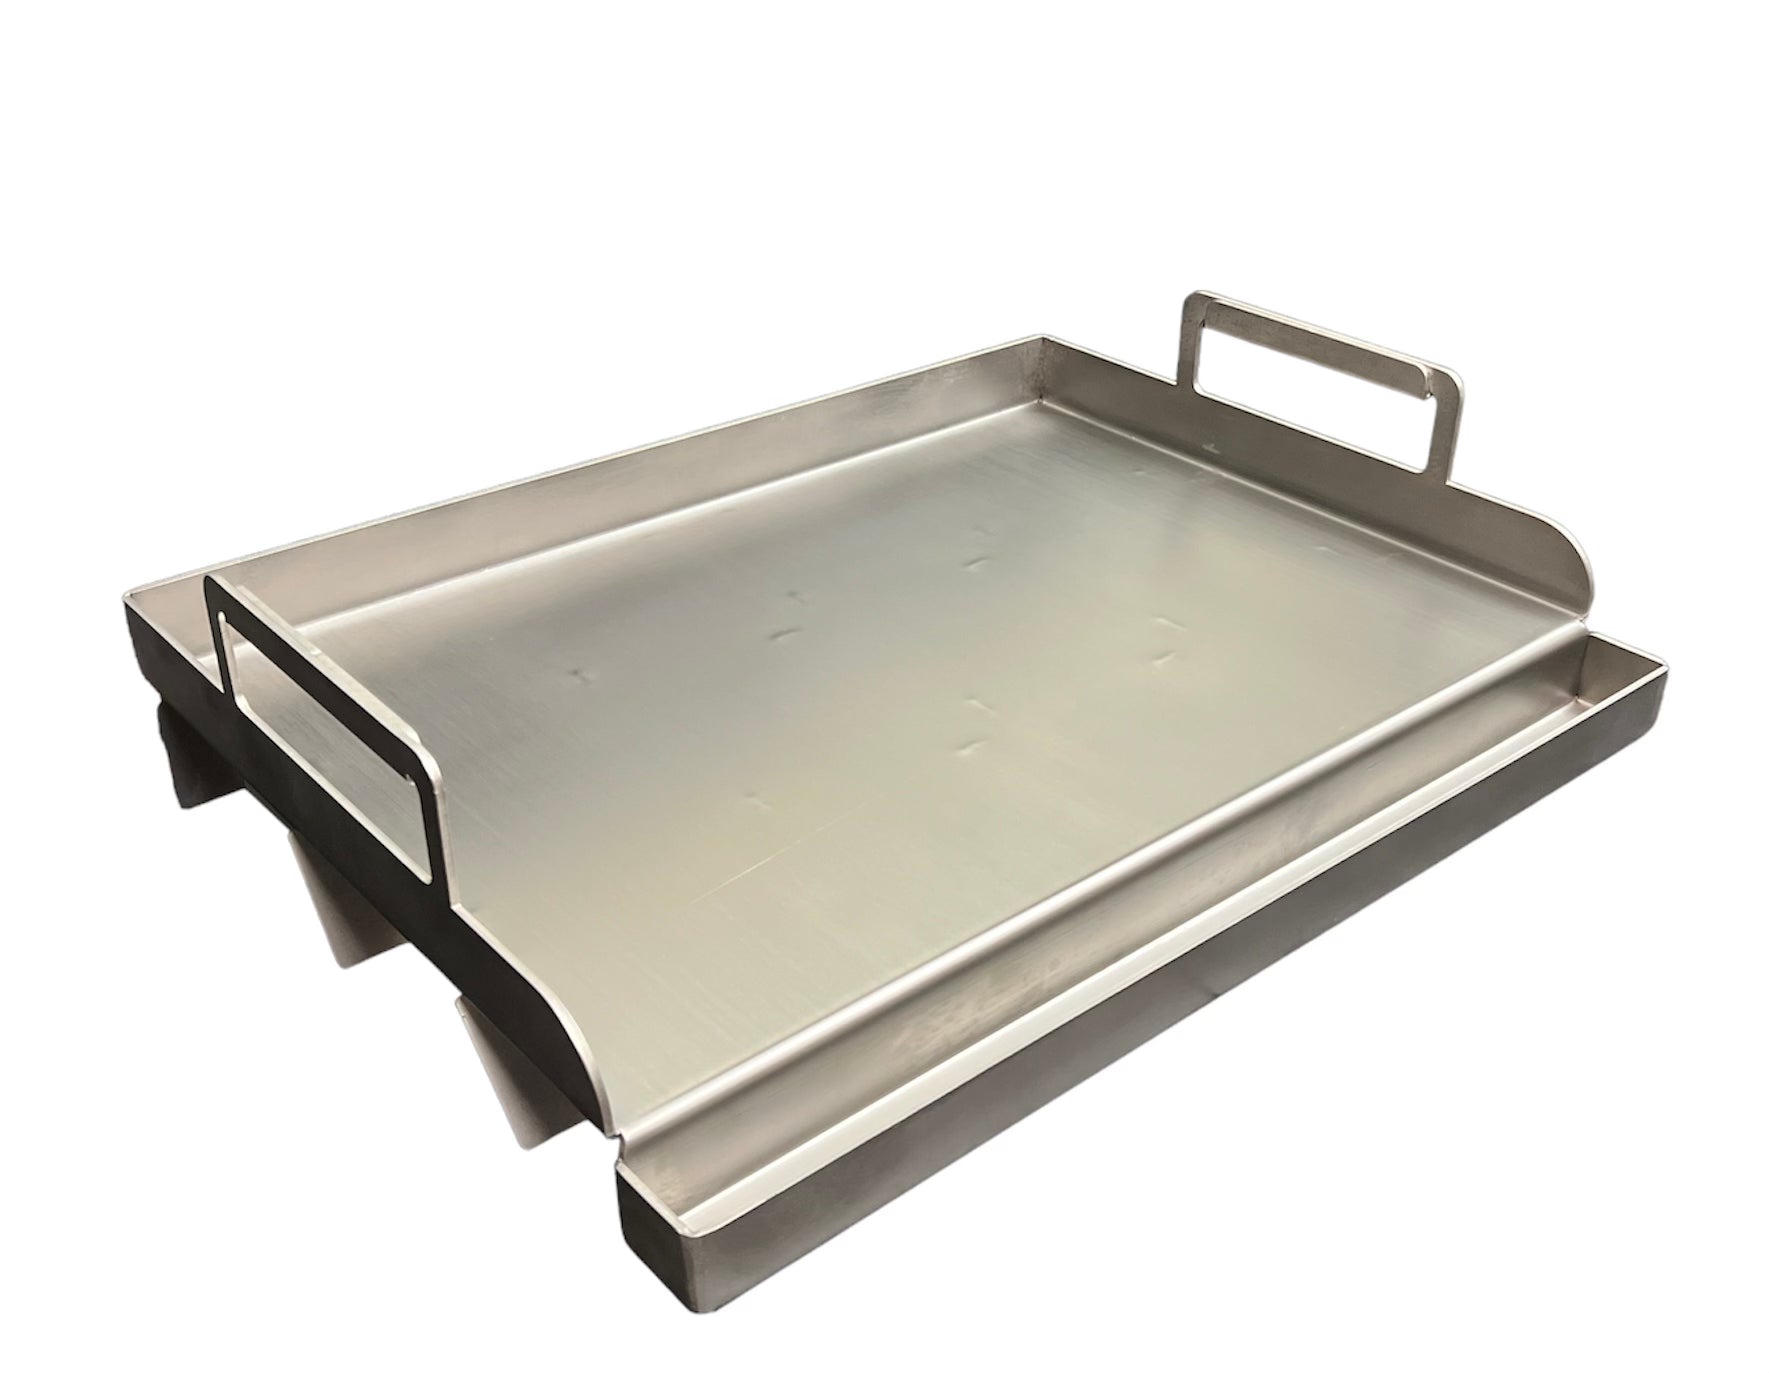 Hasty Bake Stainless Griddle "Junior" - Fits Suburban/Continental/Ranger